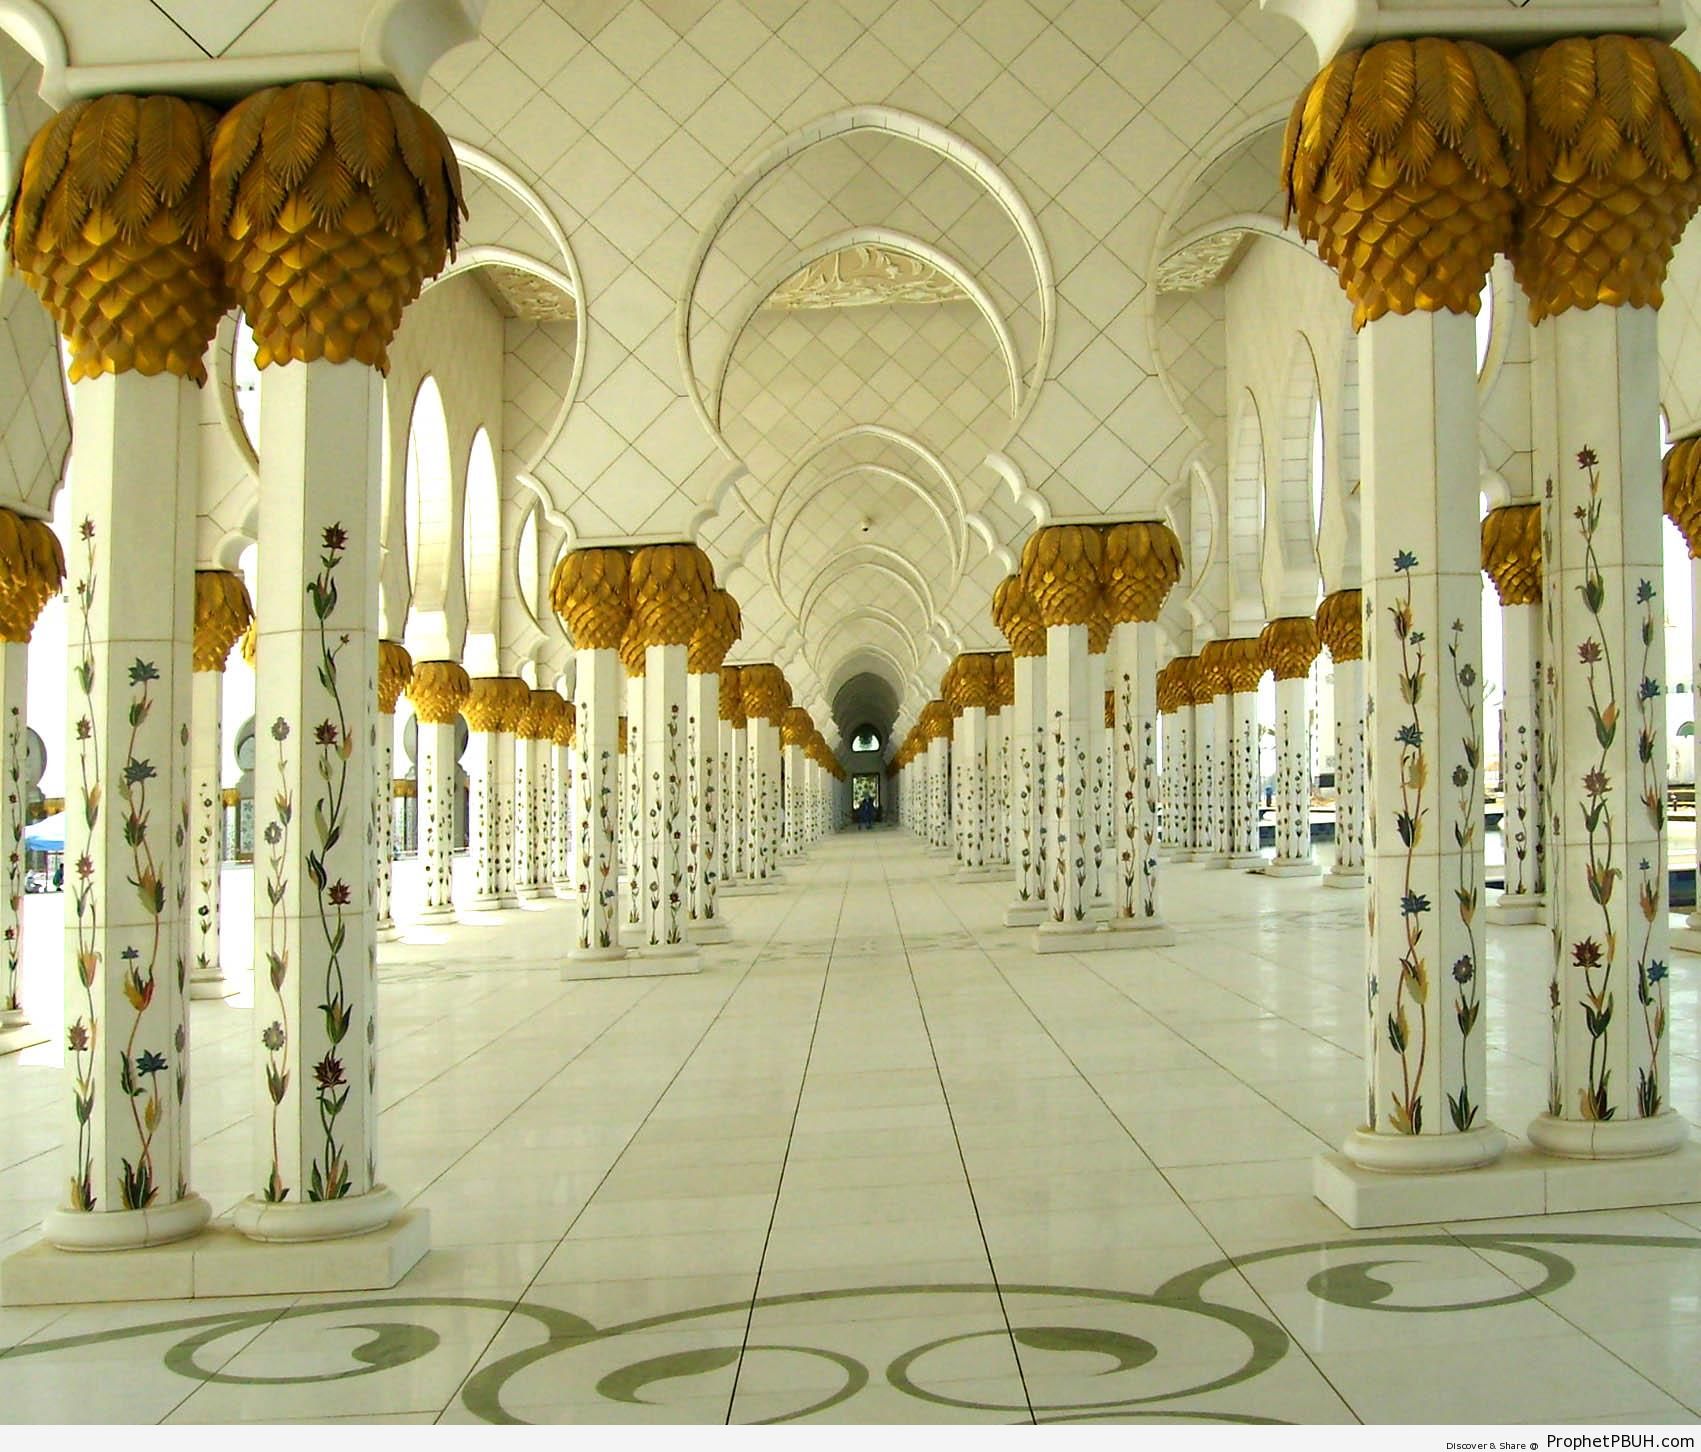 Archways at Sheikh Zayed Grand Mosque in Abu Dhabi, United Arab Emirates - Abu Dhabi, United Arab Emirates -Picture